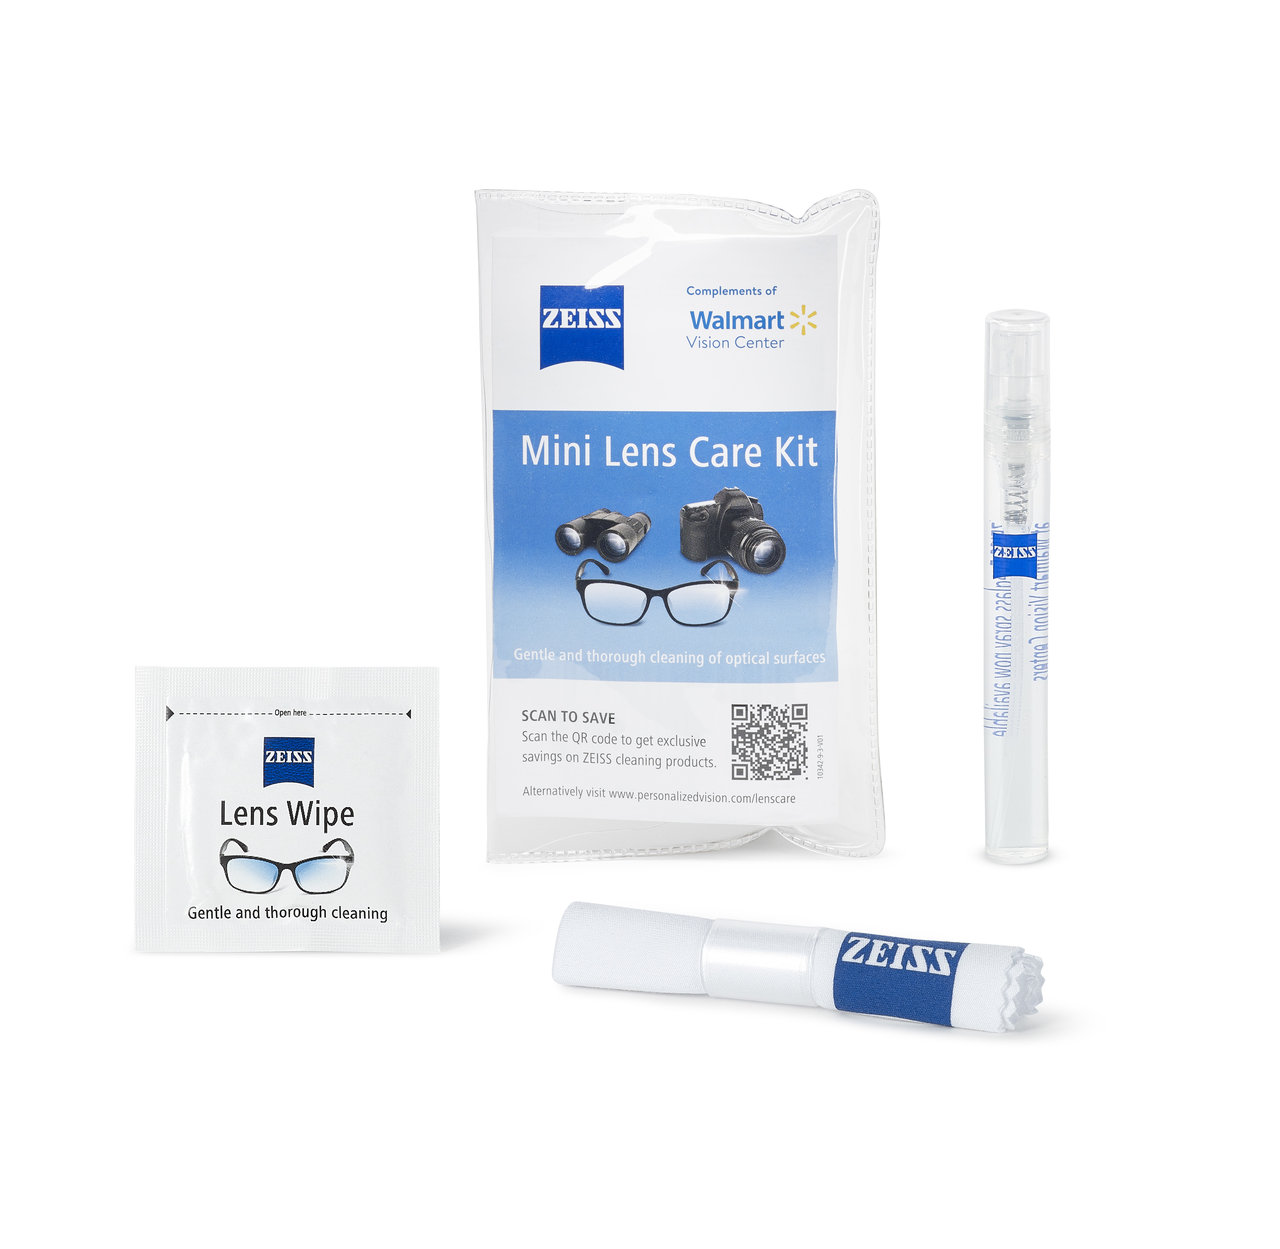 shield lenscare products